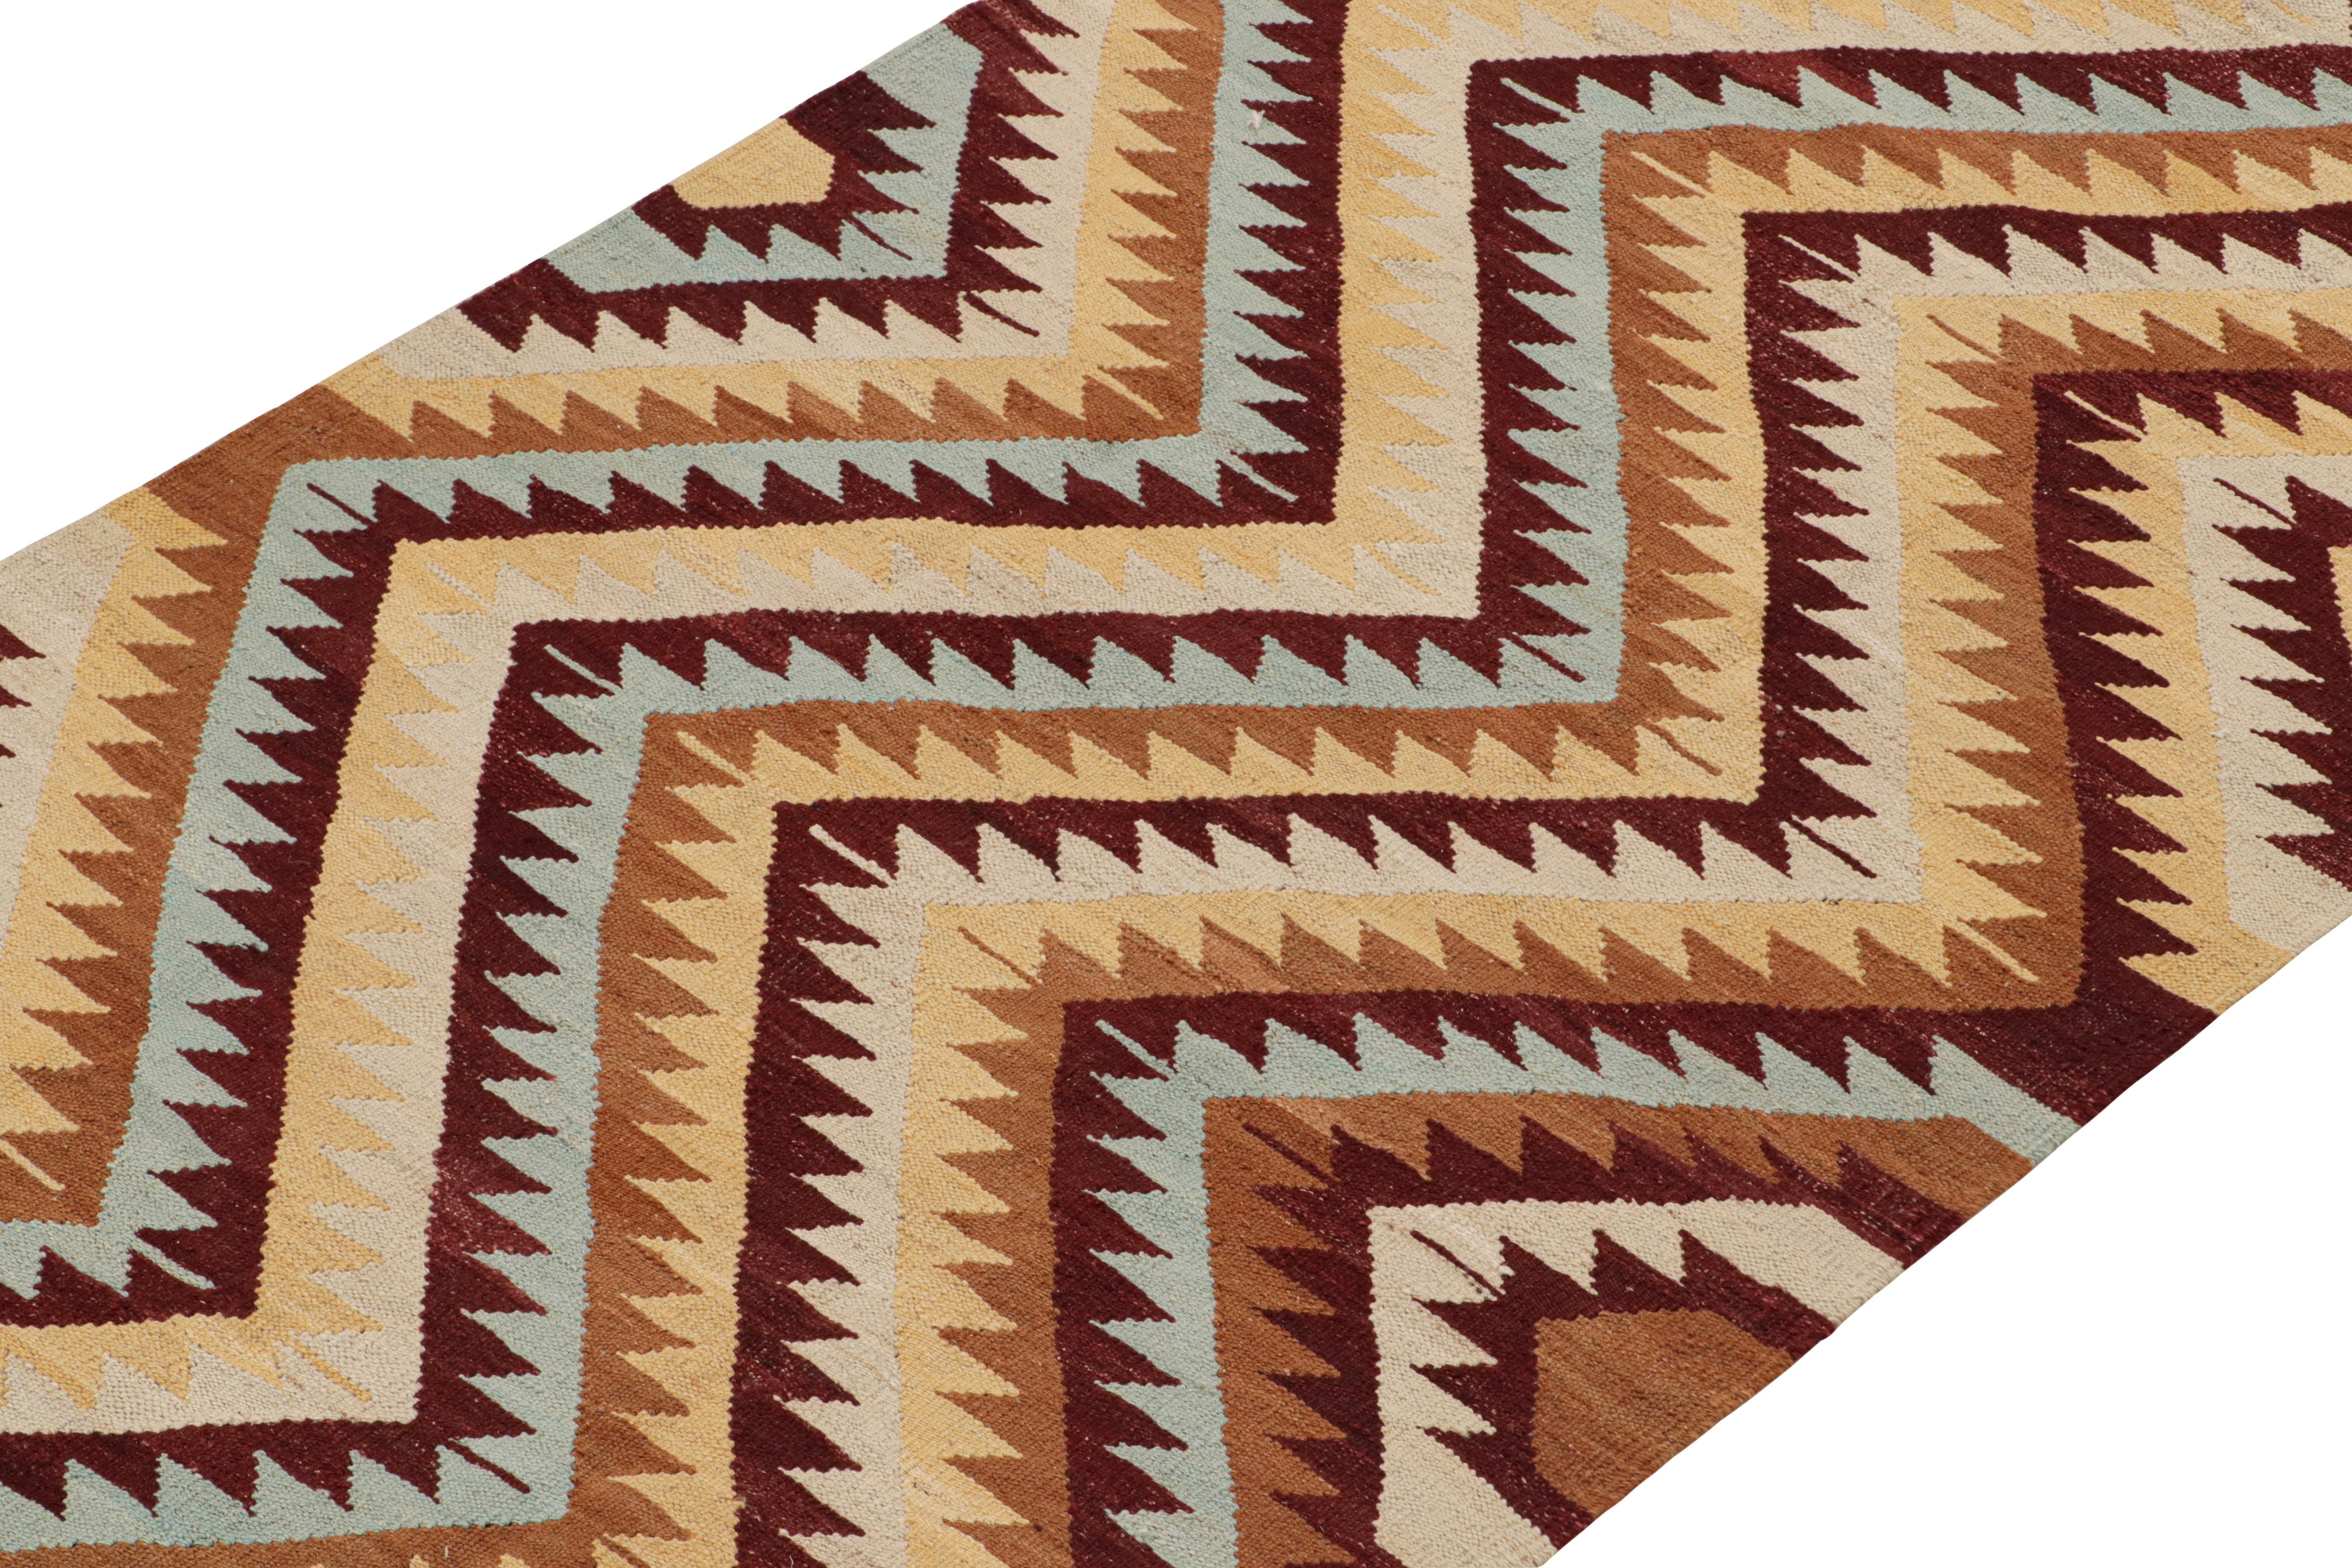 Handwoven in wool, this contemporary 4x12 Kilim by Rug & Kilim is inspired by antique tribal Kilims and flatweaves. 

On the Design:

This runner enjoys a play of chevrons and geometric patterns in burgundy, beige-brown, sky blue and gold hues.